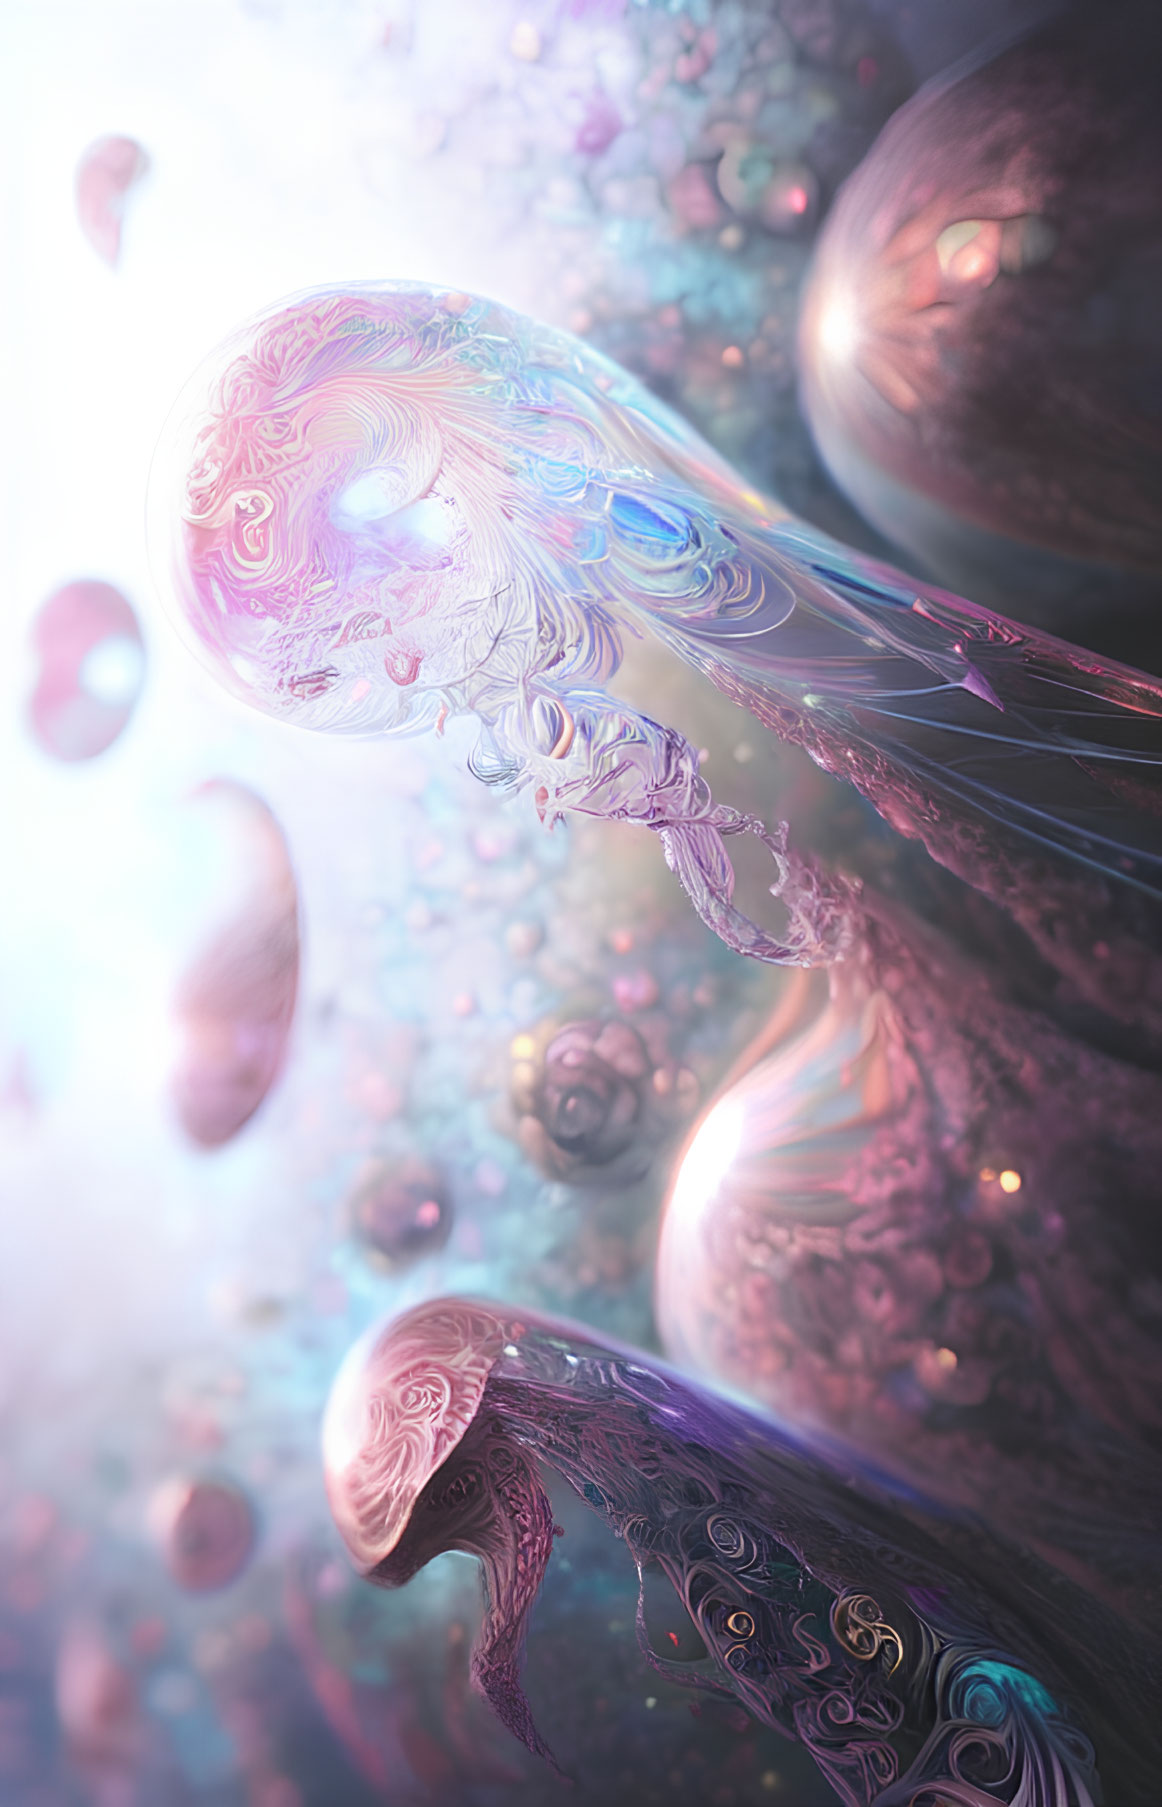 3D-rendered surreal image: Metallic, organic shapes with intricate patterns in pink and purple palette